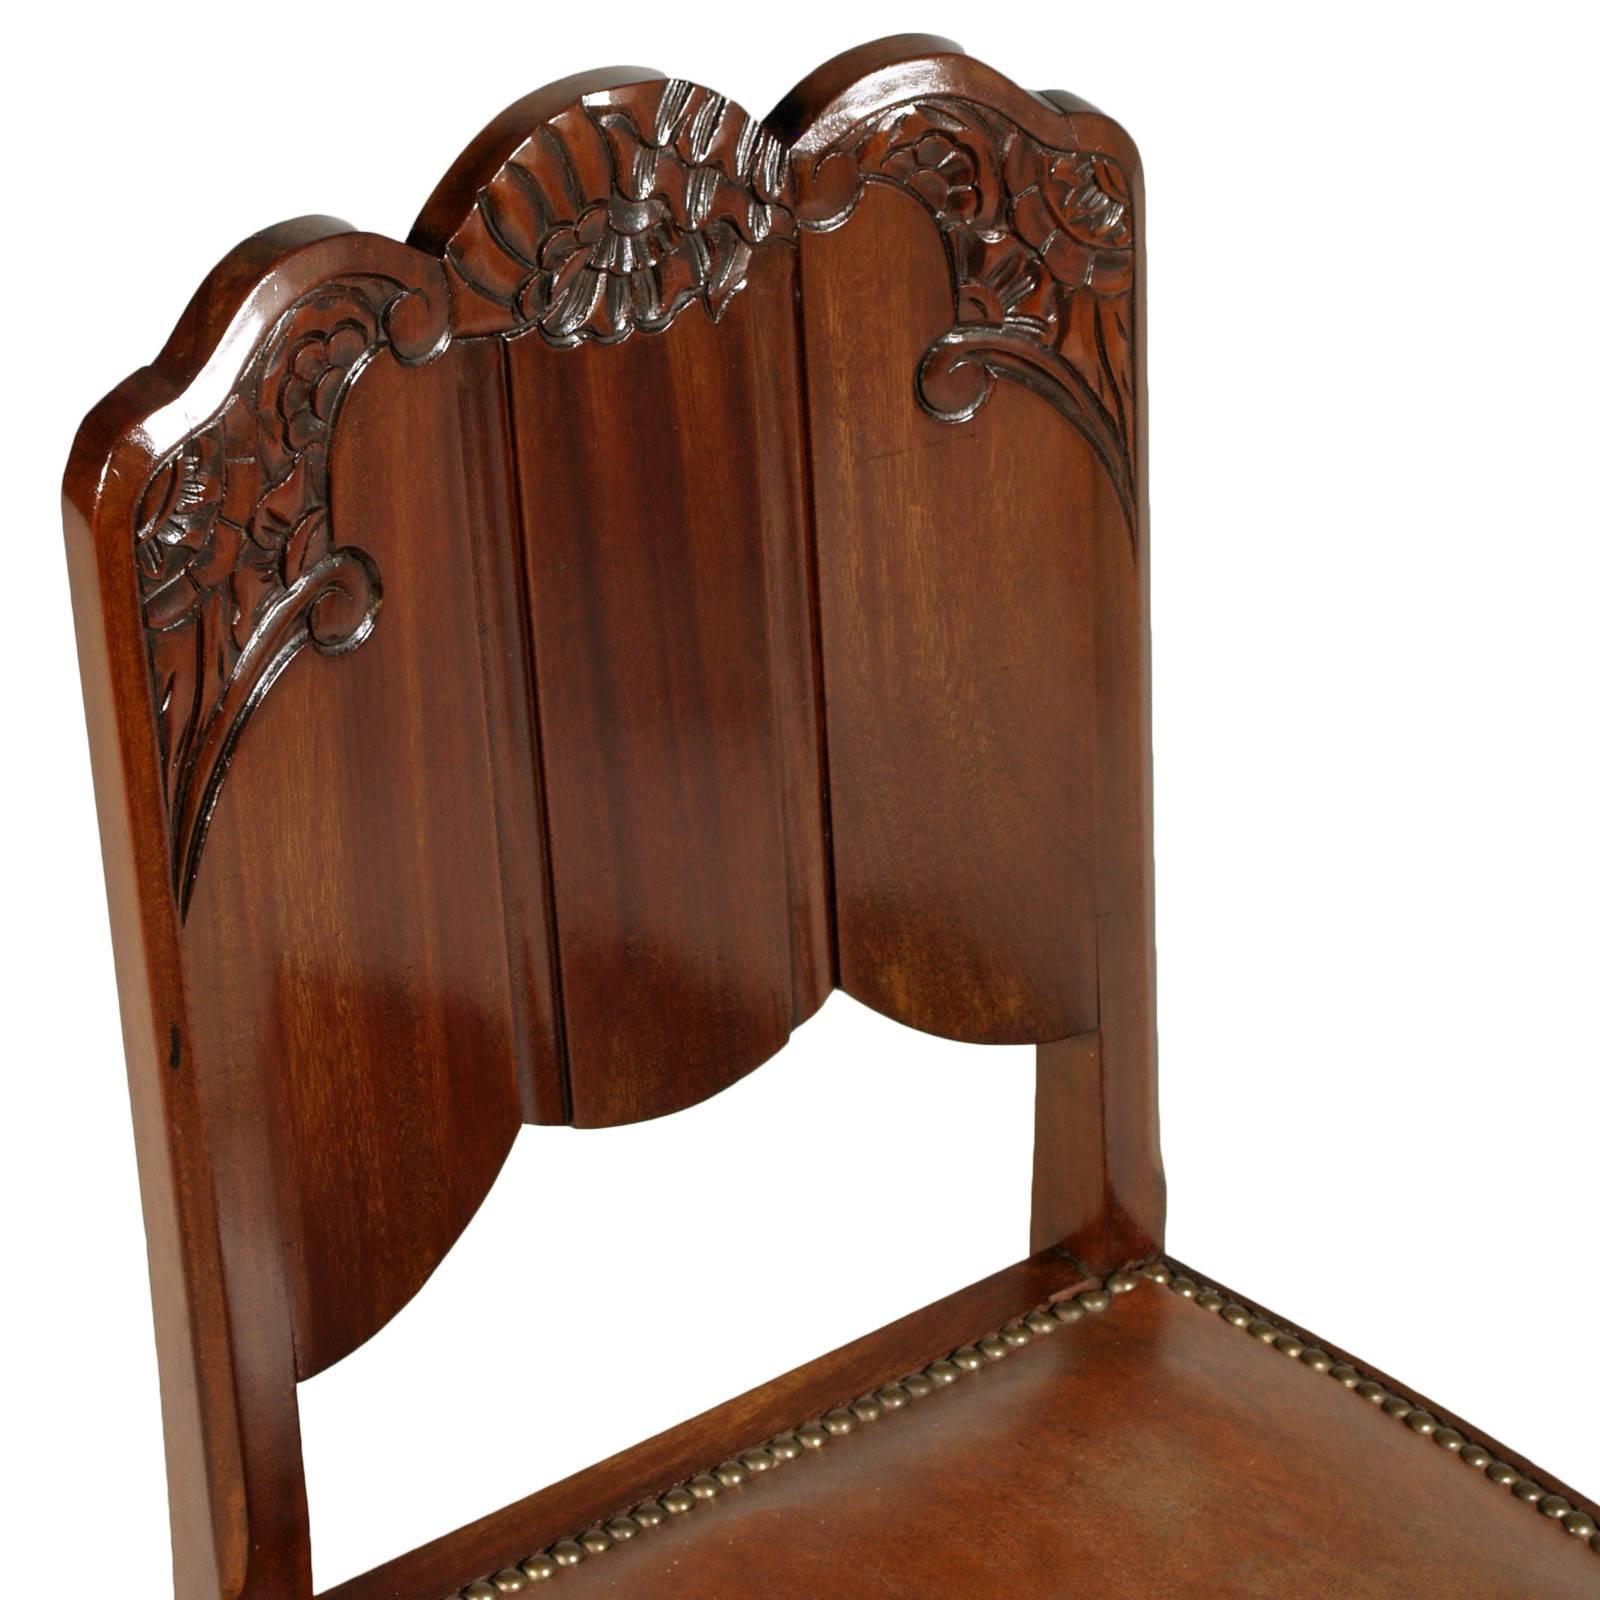 Early 20th century French Art Nouveau carved mahogany chair with leatherette tobacco color seat with springs. Restored and polished to wax.
Precious chair also for a modern desk.
Printed under 